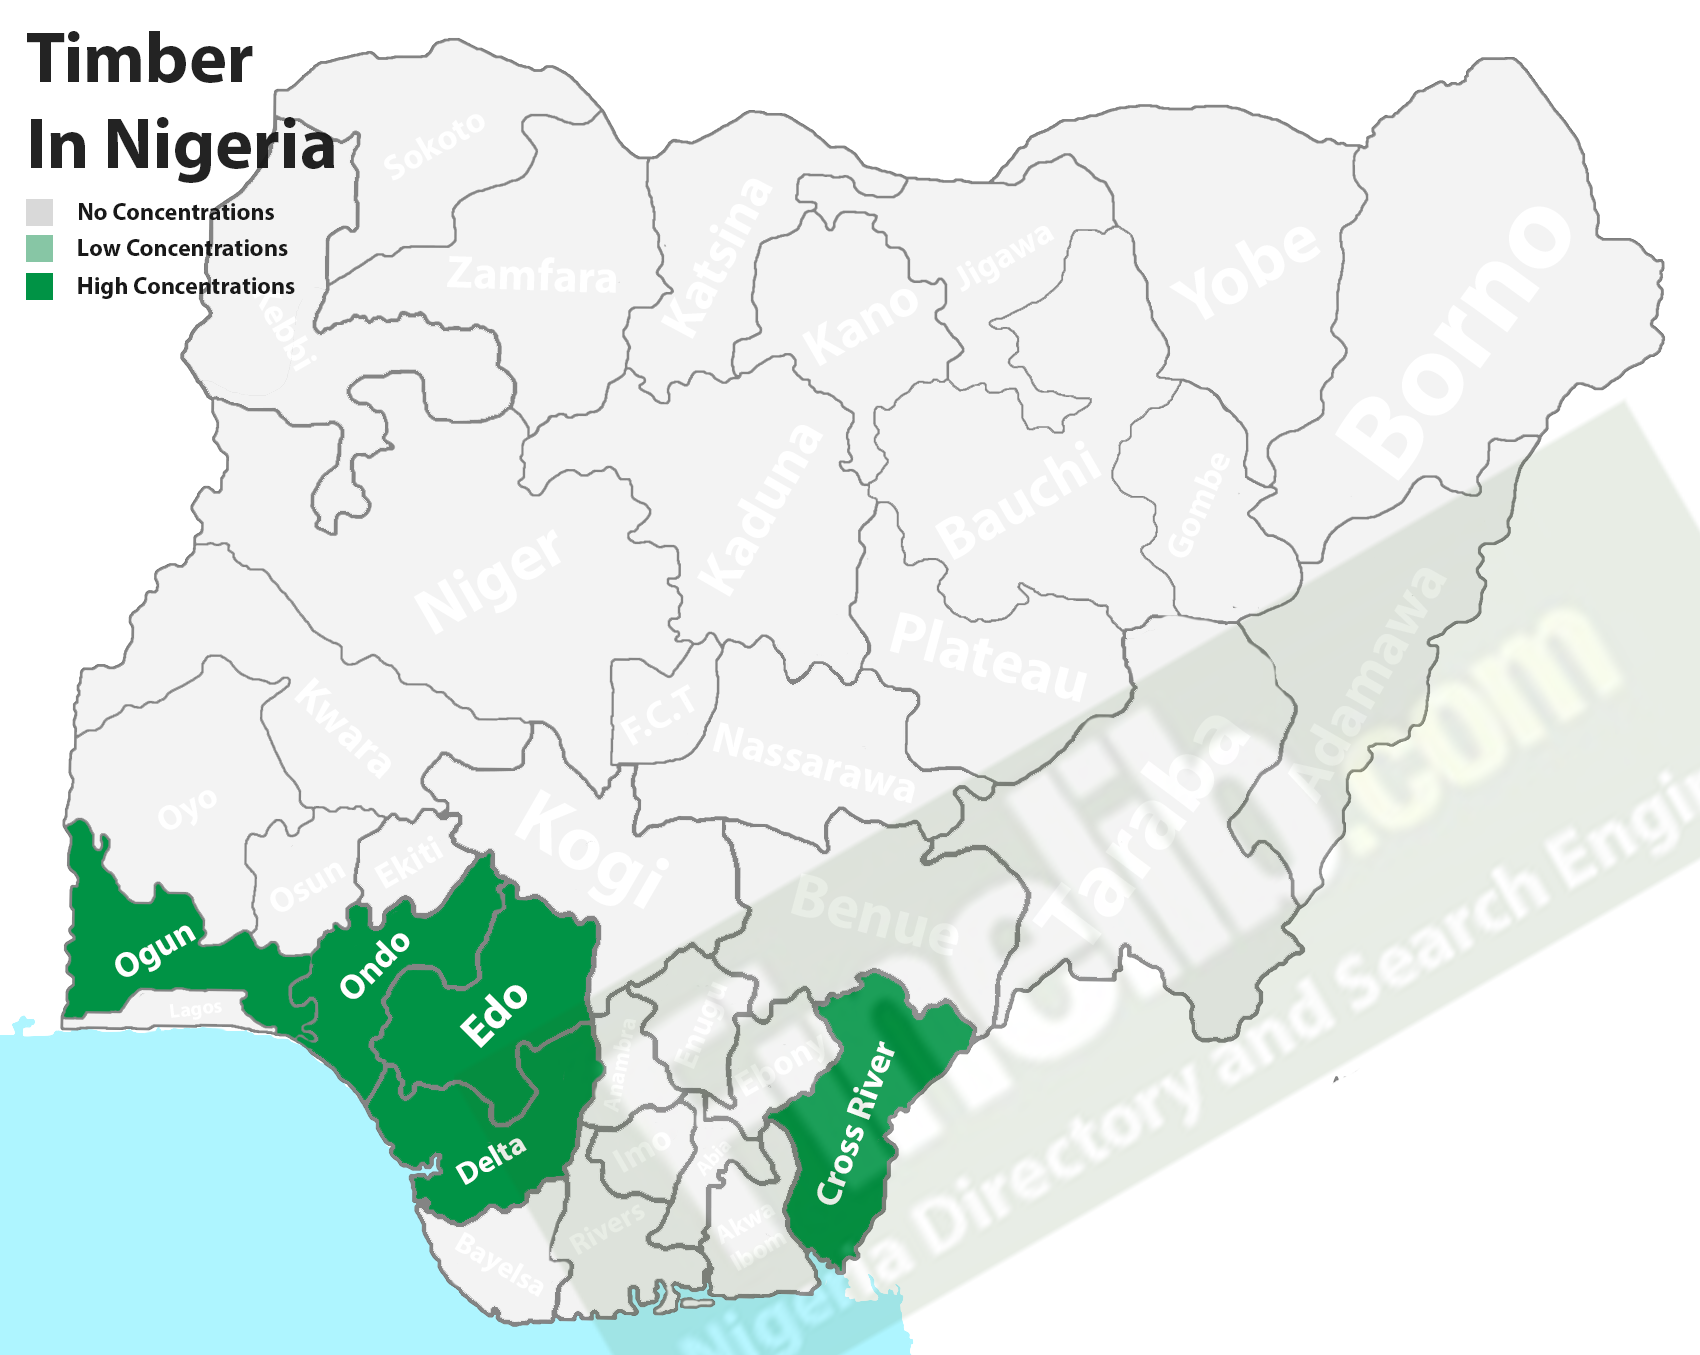 Timber cultivation and processing in Nigeria